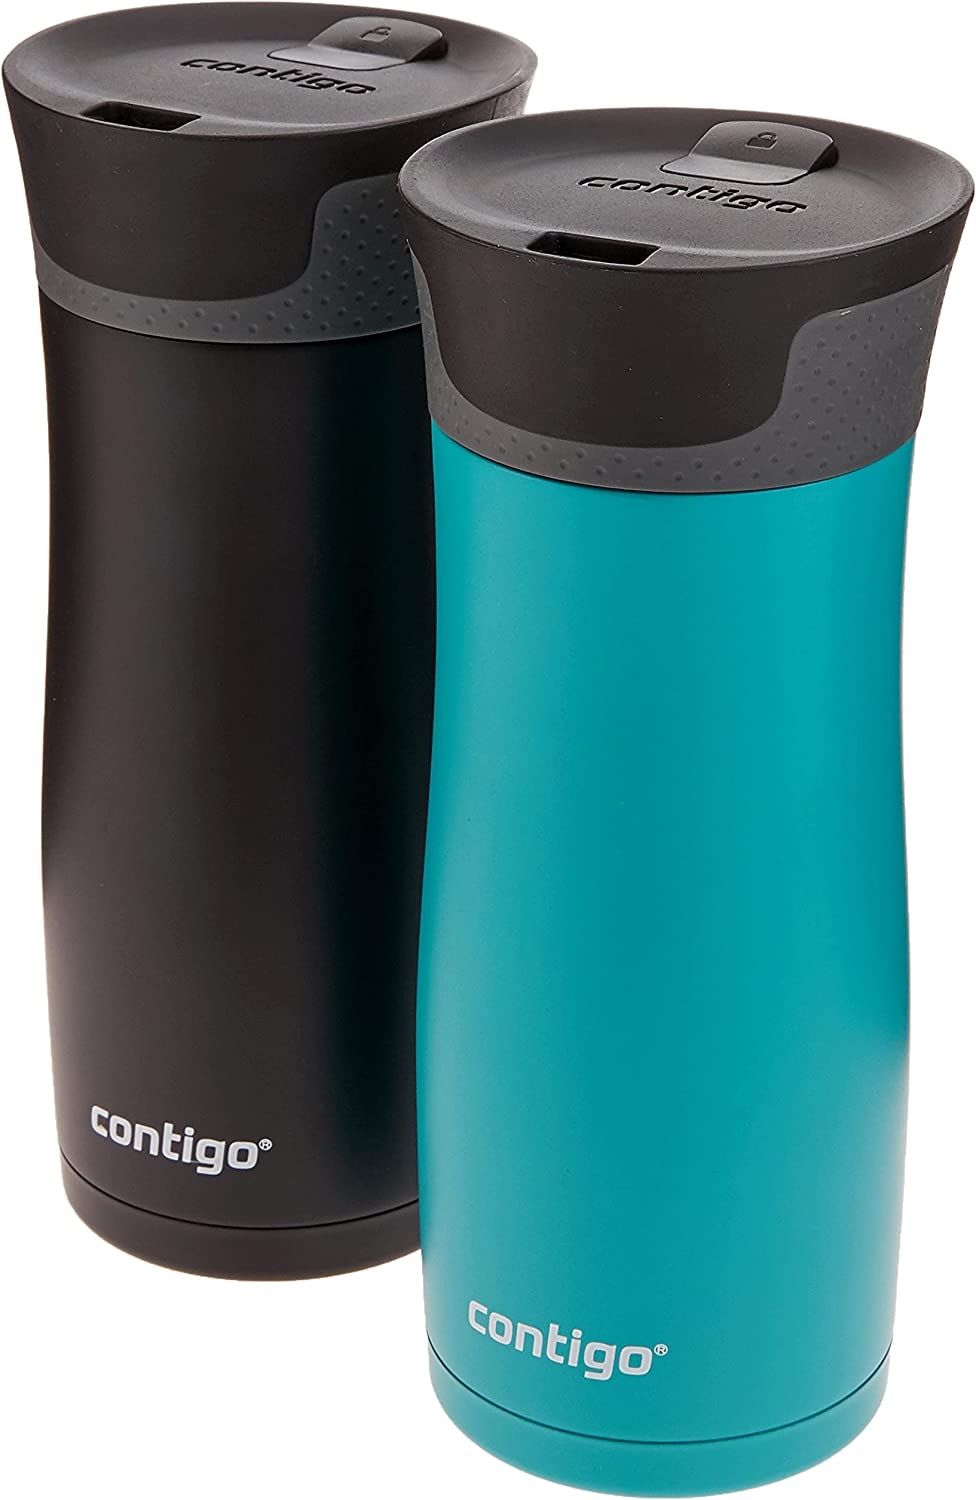 Contigo Autoseal West Loop 2.0 – Vacuum Insulated Stainless Steel Thermal Coffee Travel Mug – Keeps Drinks Hot or Cold for Hours